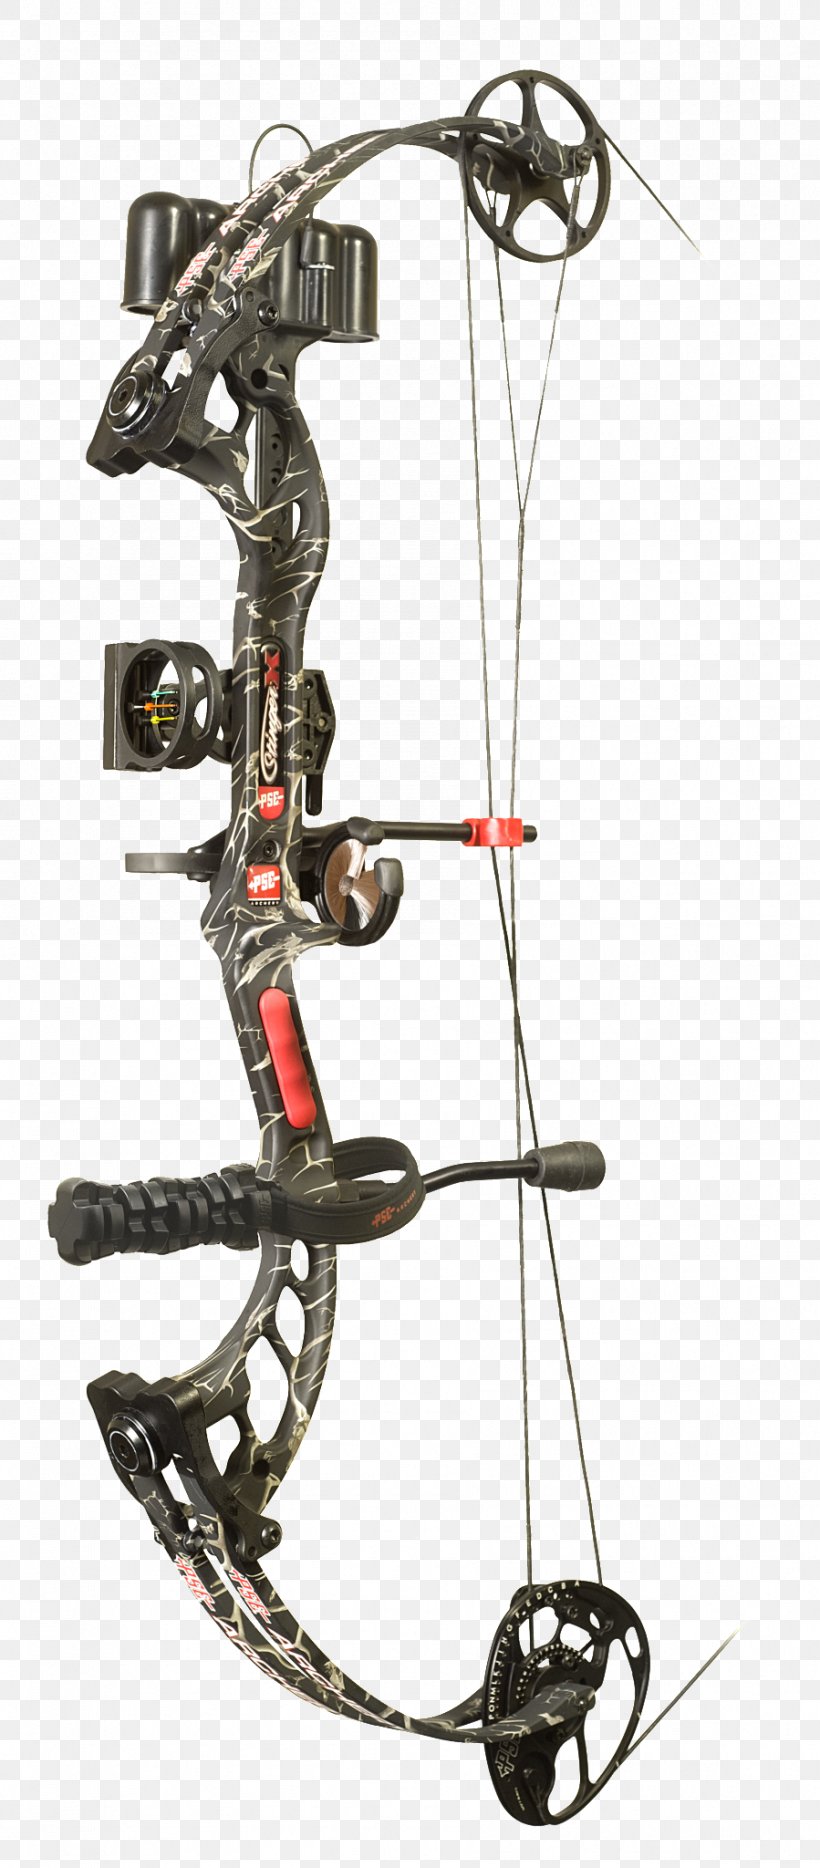 Compound Bows PSE Archery Hunting Bow And Arrow, PNG, 899x2048px, Compound Bows, Archery, Bear Archery, Bit, Bow Download Free